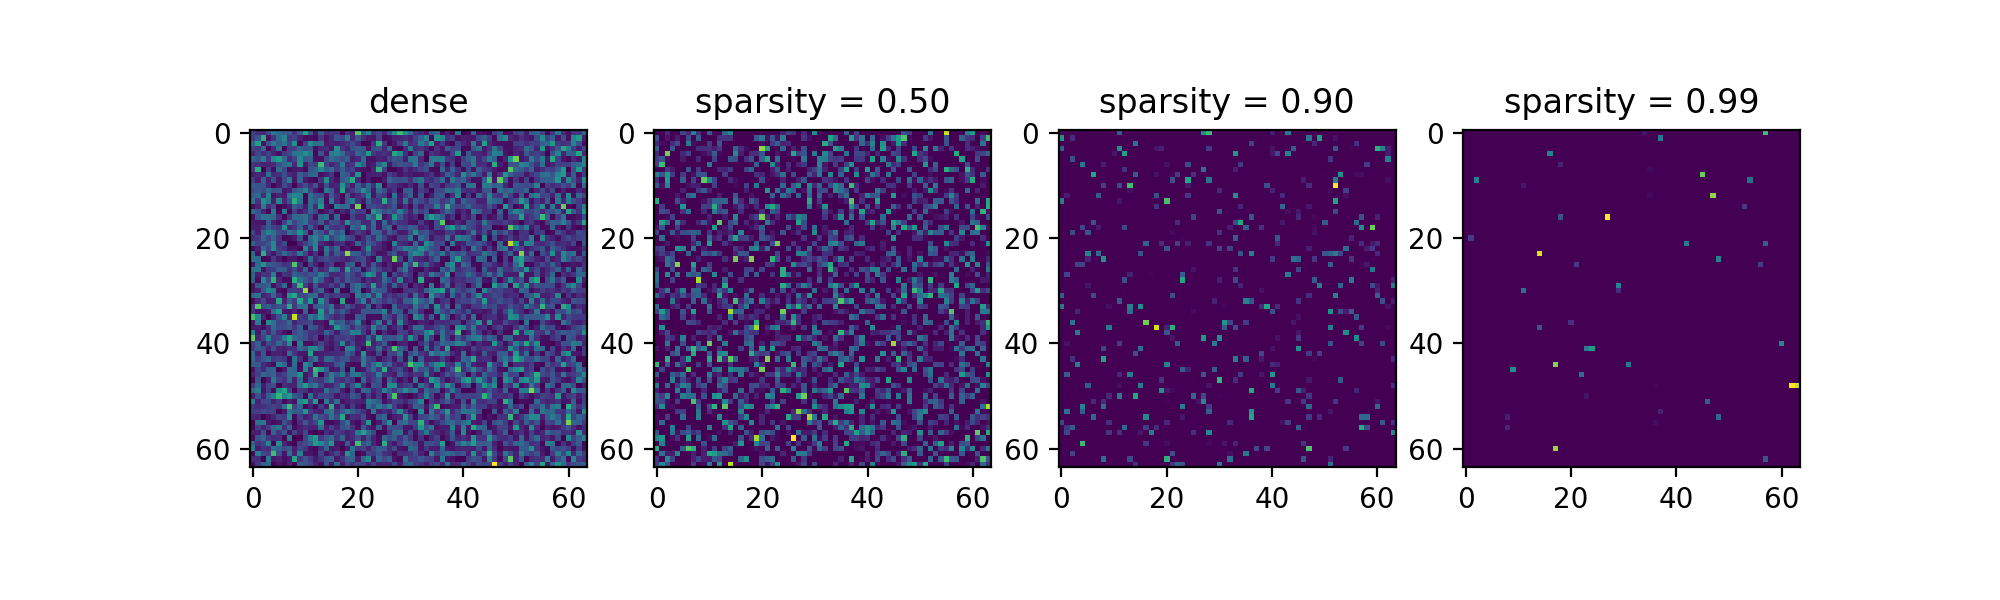 Matrices with increasing sparsity